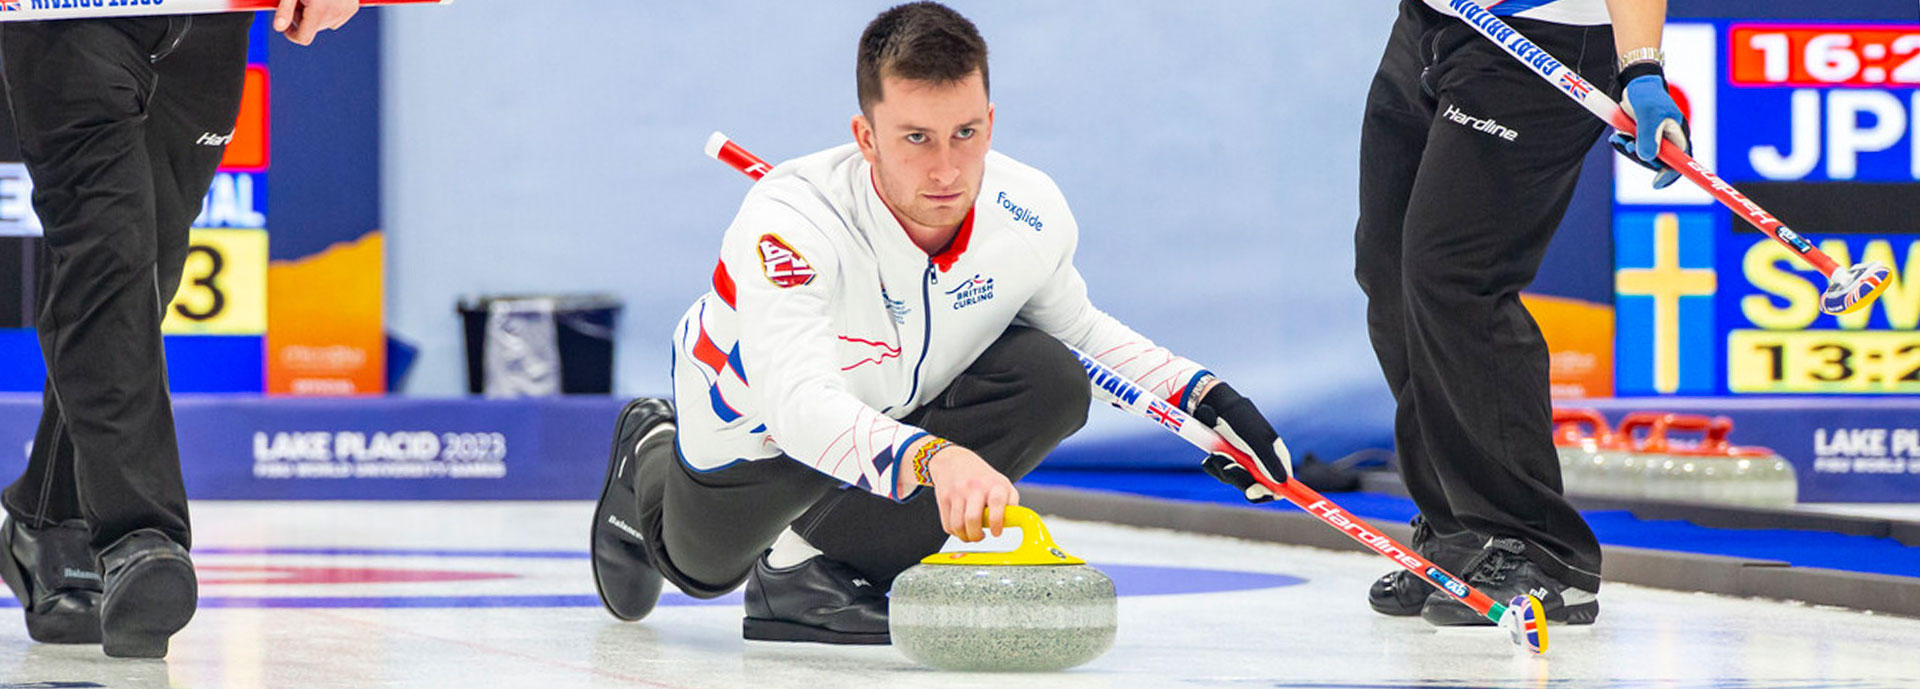 James Craik slides a stone down the sheet during the World University Games in Lake Placid.